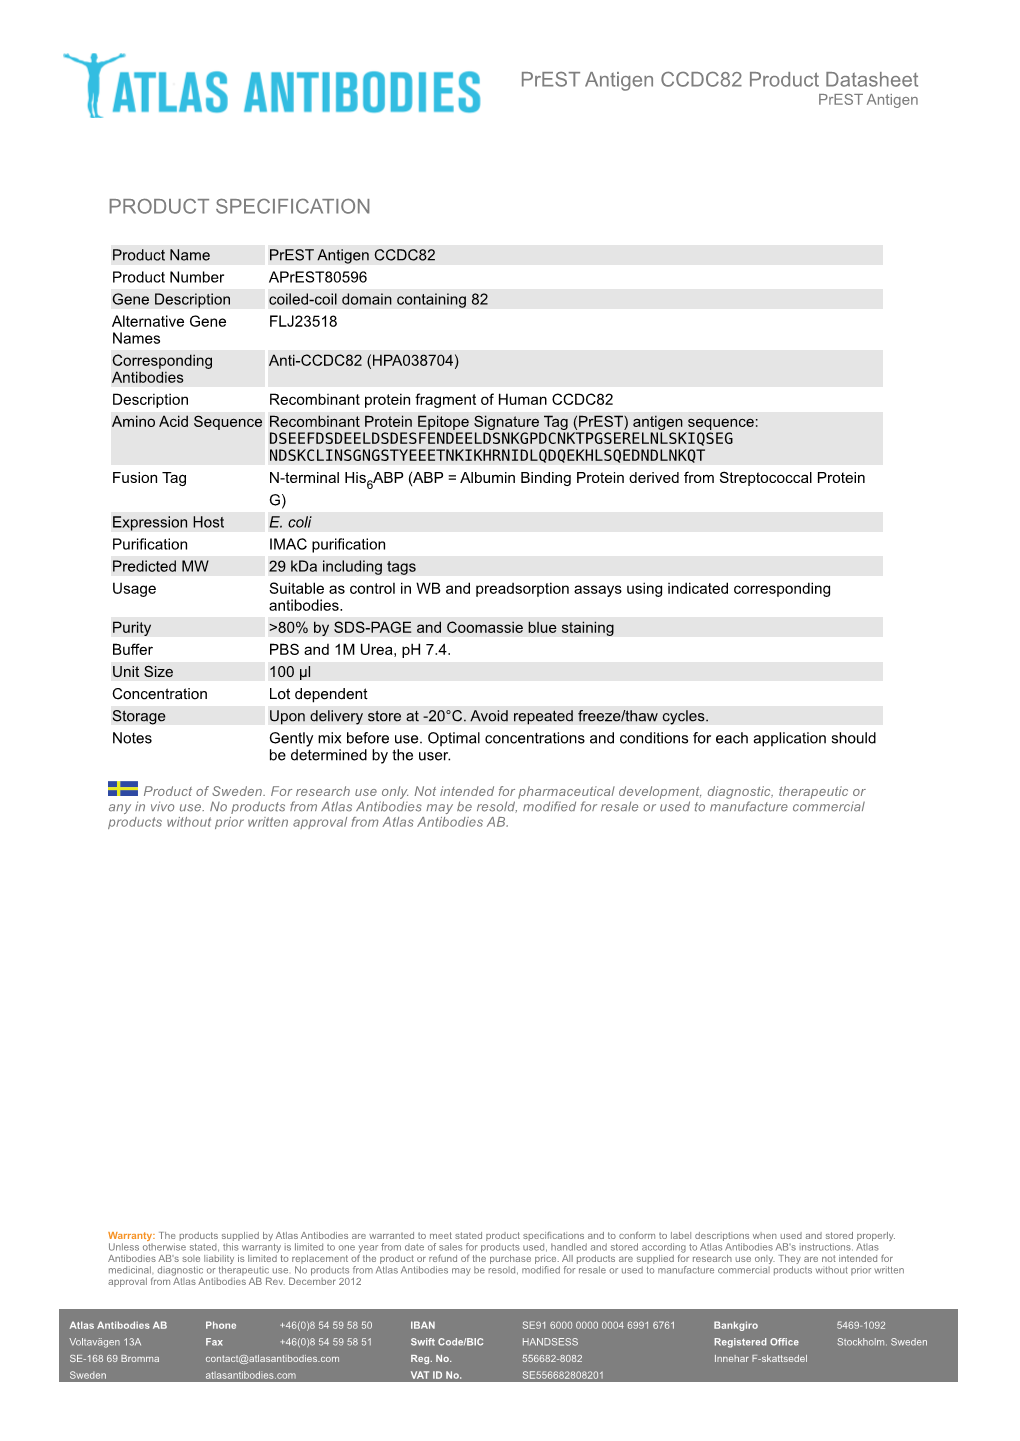 PRODUCT SPECIFICATION Prest Antigen CCDC82 Product Datasheet